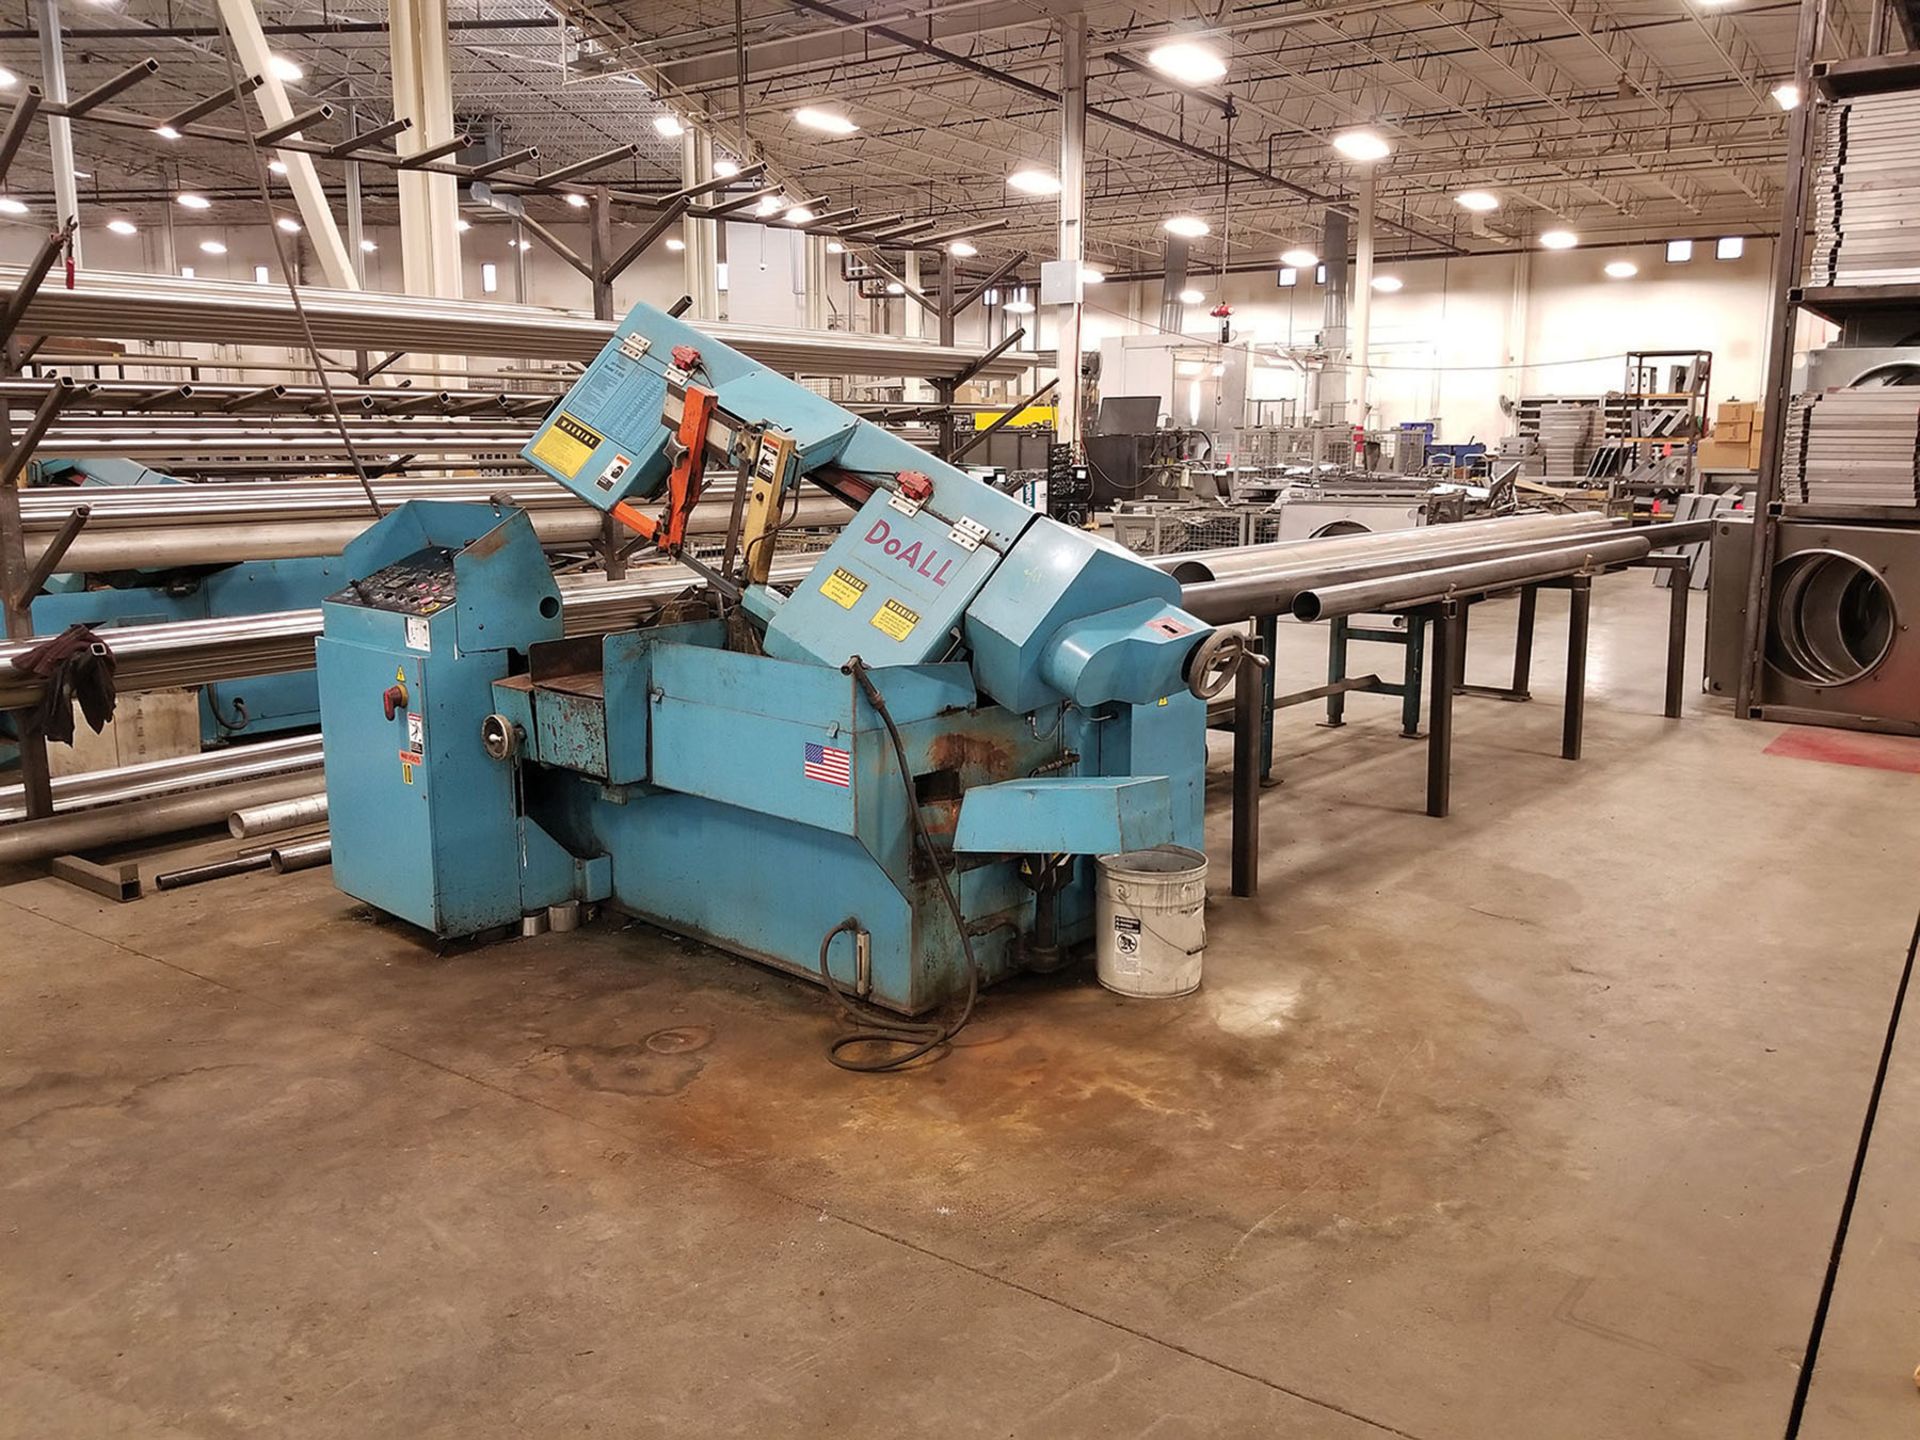 DOALL C-305 A AUTOMATIC HORIZONTAL BAND SAW, S/N 534-00314, 12' BAND LENGTH, LIMIT SWITCH & - Image 10 of 13